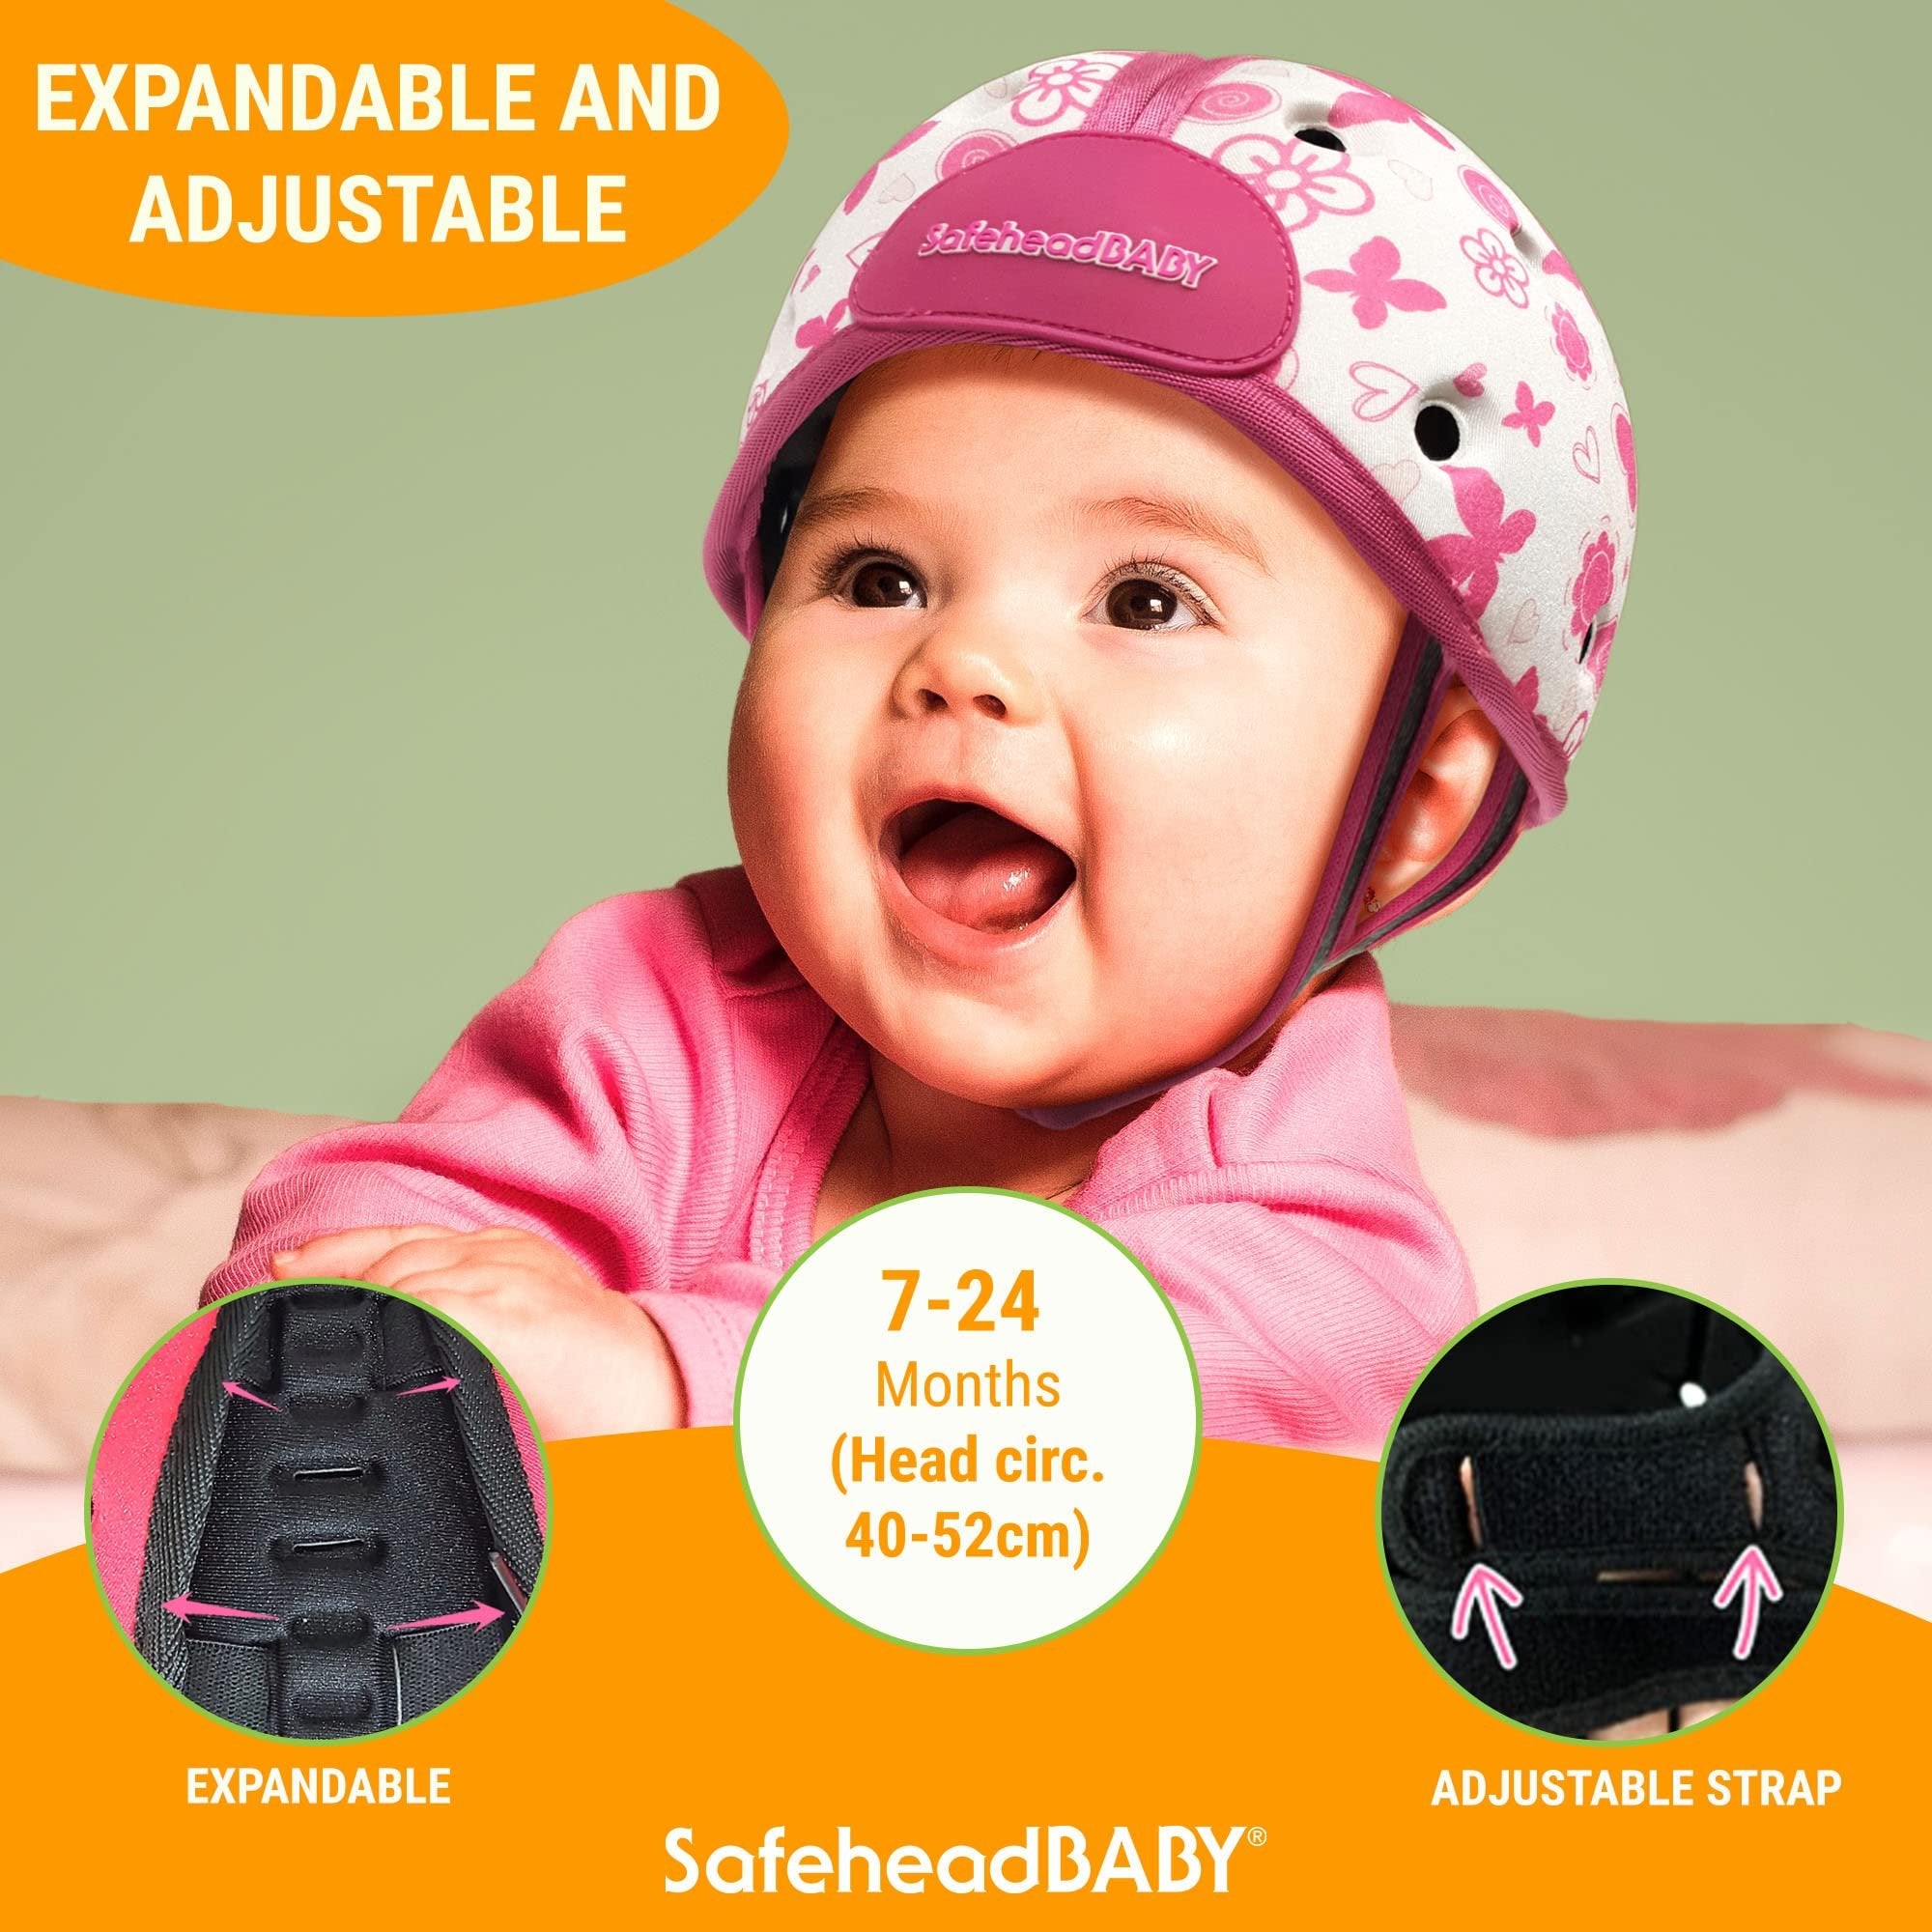 SafeheadBABY Infant Safety Helmet - Red, Adjustable, Lightweight - Size 1 - Crawling, Walking, Head Protection